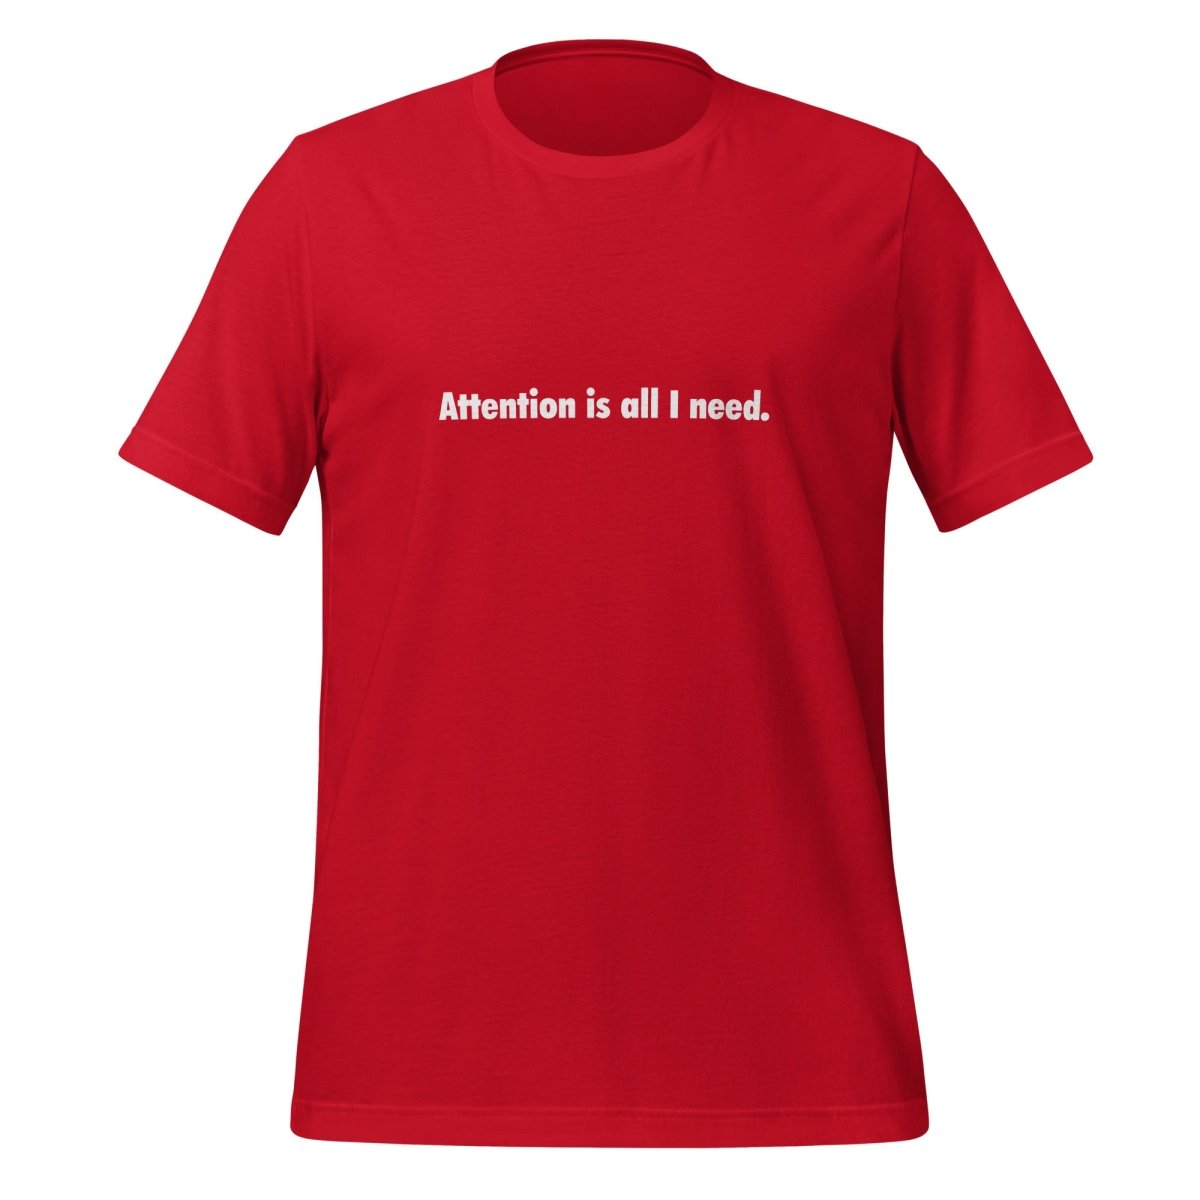 Attention is all I need. T - Shirt (unisex) - Red - AI Store